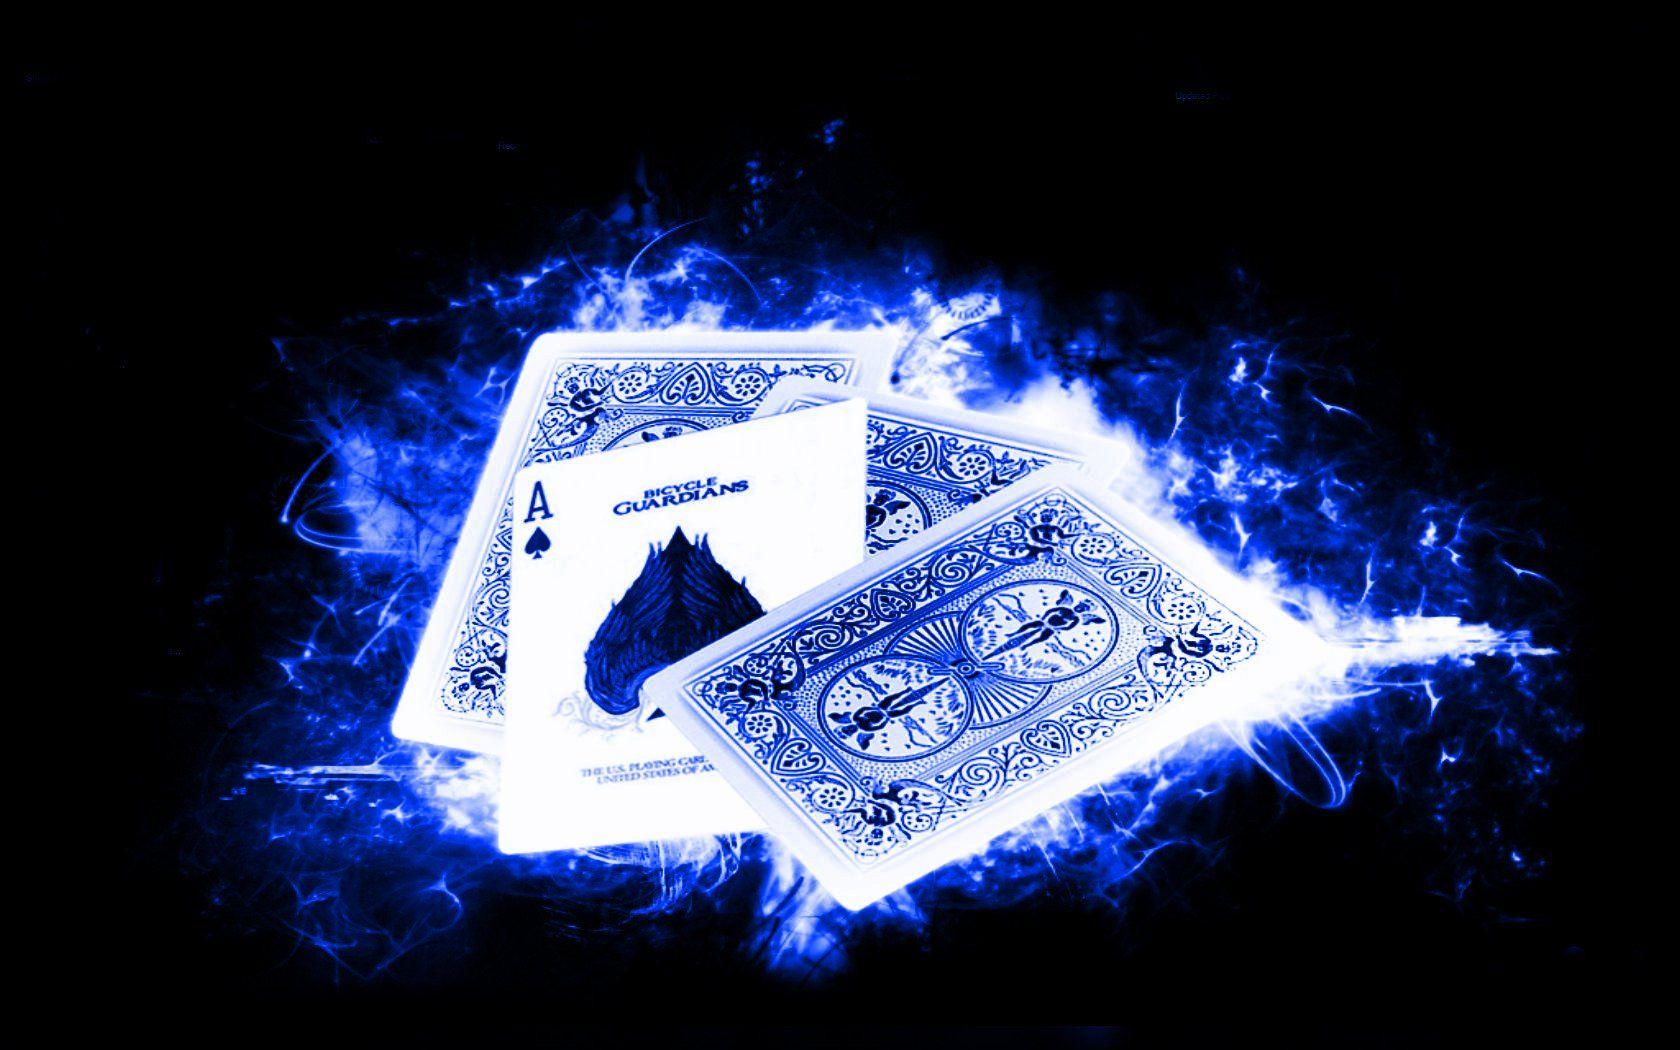 Ace Of Spades Wallpaper Pack 31: Ace Of Spades Wallpaper, 34 Ace